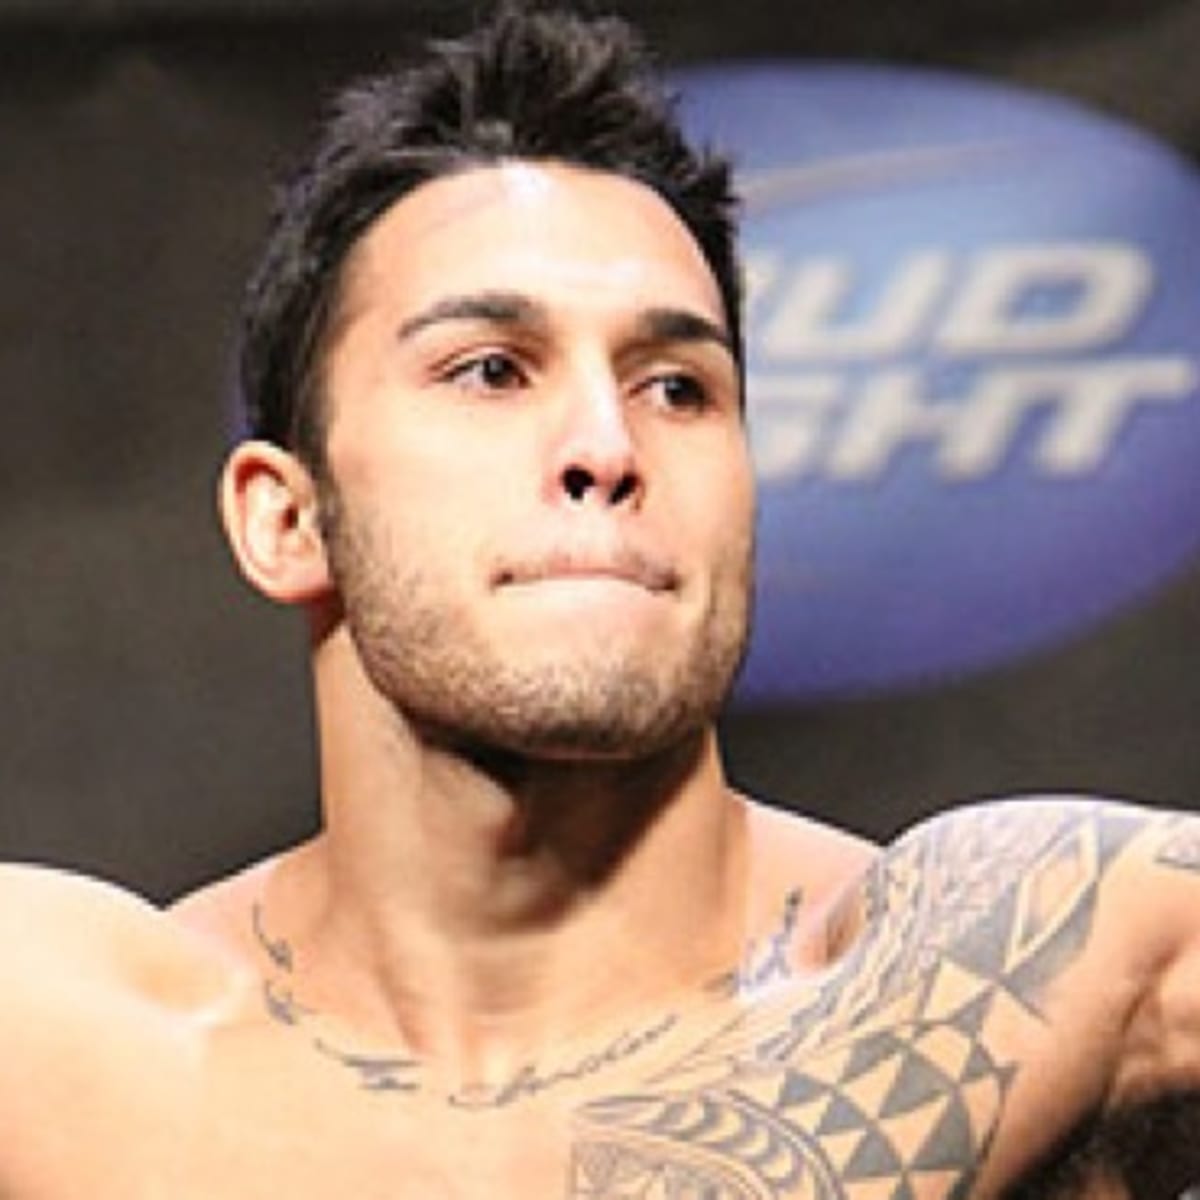 Brad Tavares on X: Just got some work done by @TattoosByBONG hit